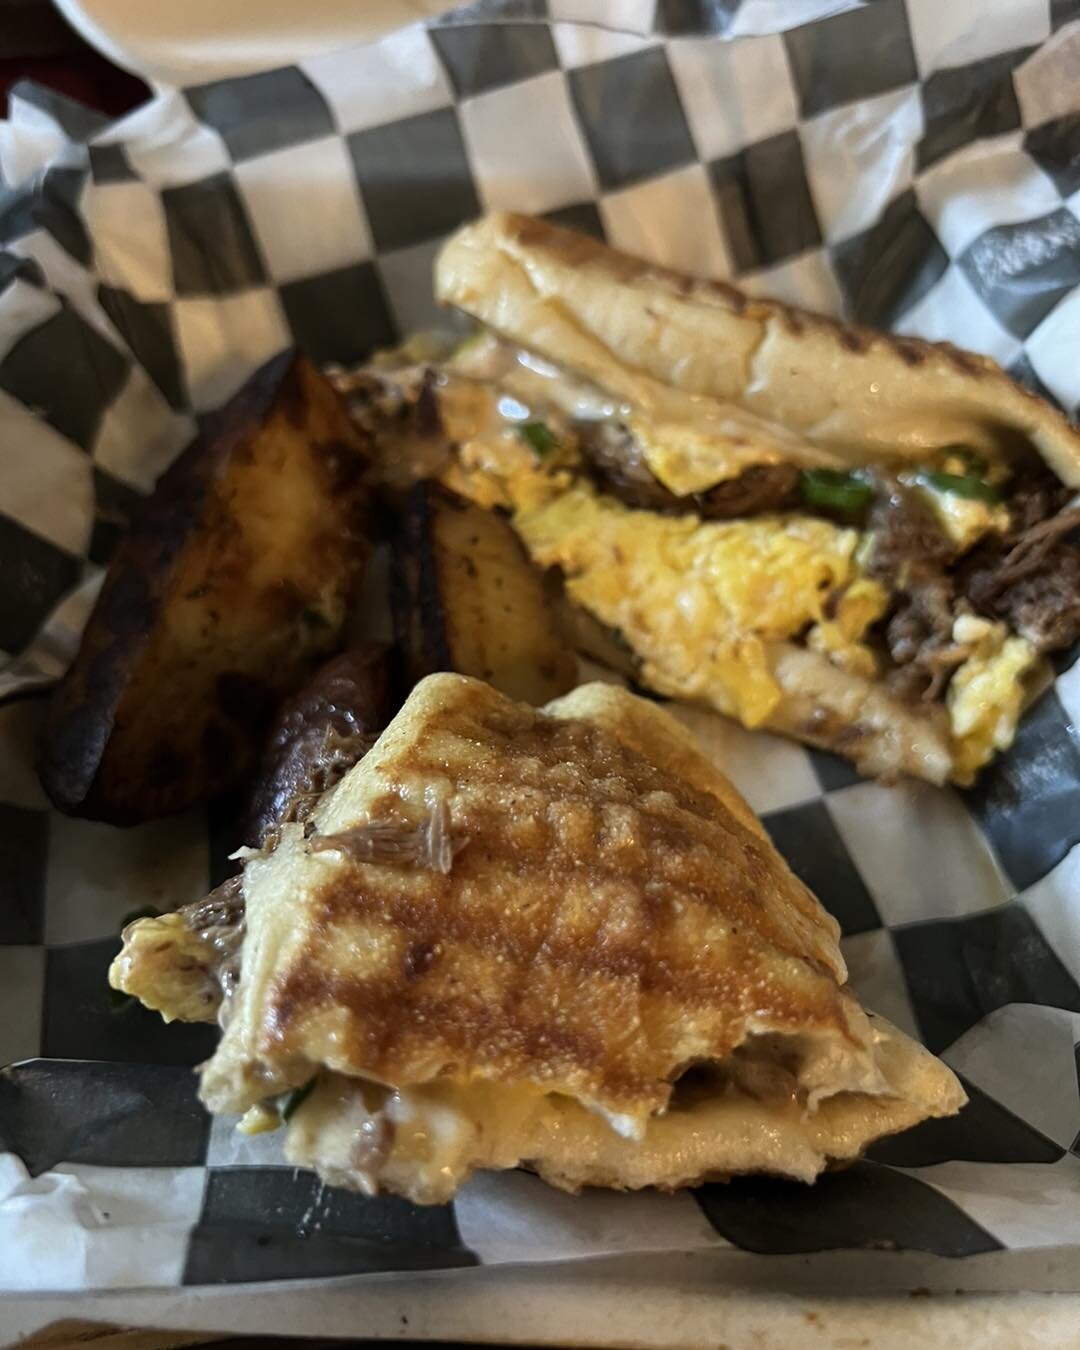 Smelled so good had to start eating before remembering to take the picture. Alvin&rsquo;s Eats serving up breakfast sandwiches that are so good and will definitely hold you till lunch. 
.
.
.
#dancingbearinn #Damascus #damascusva #visitdamascusva #da